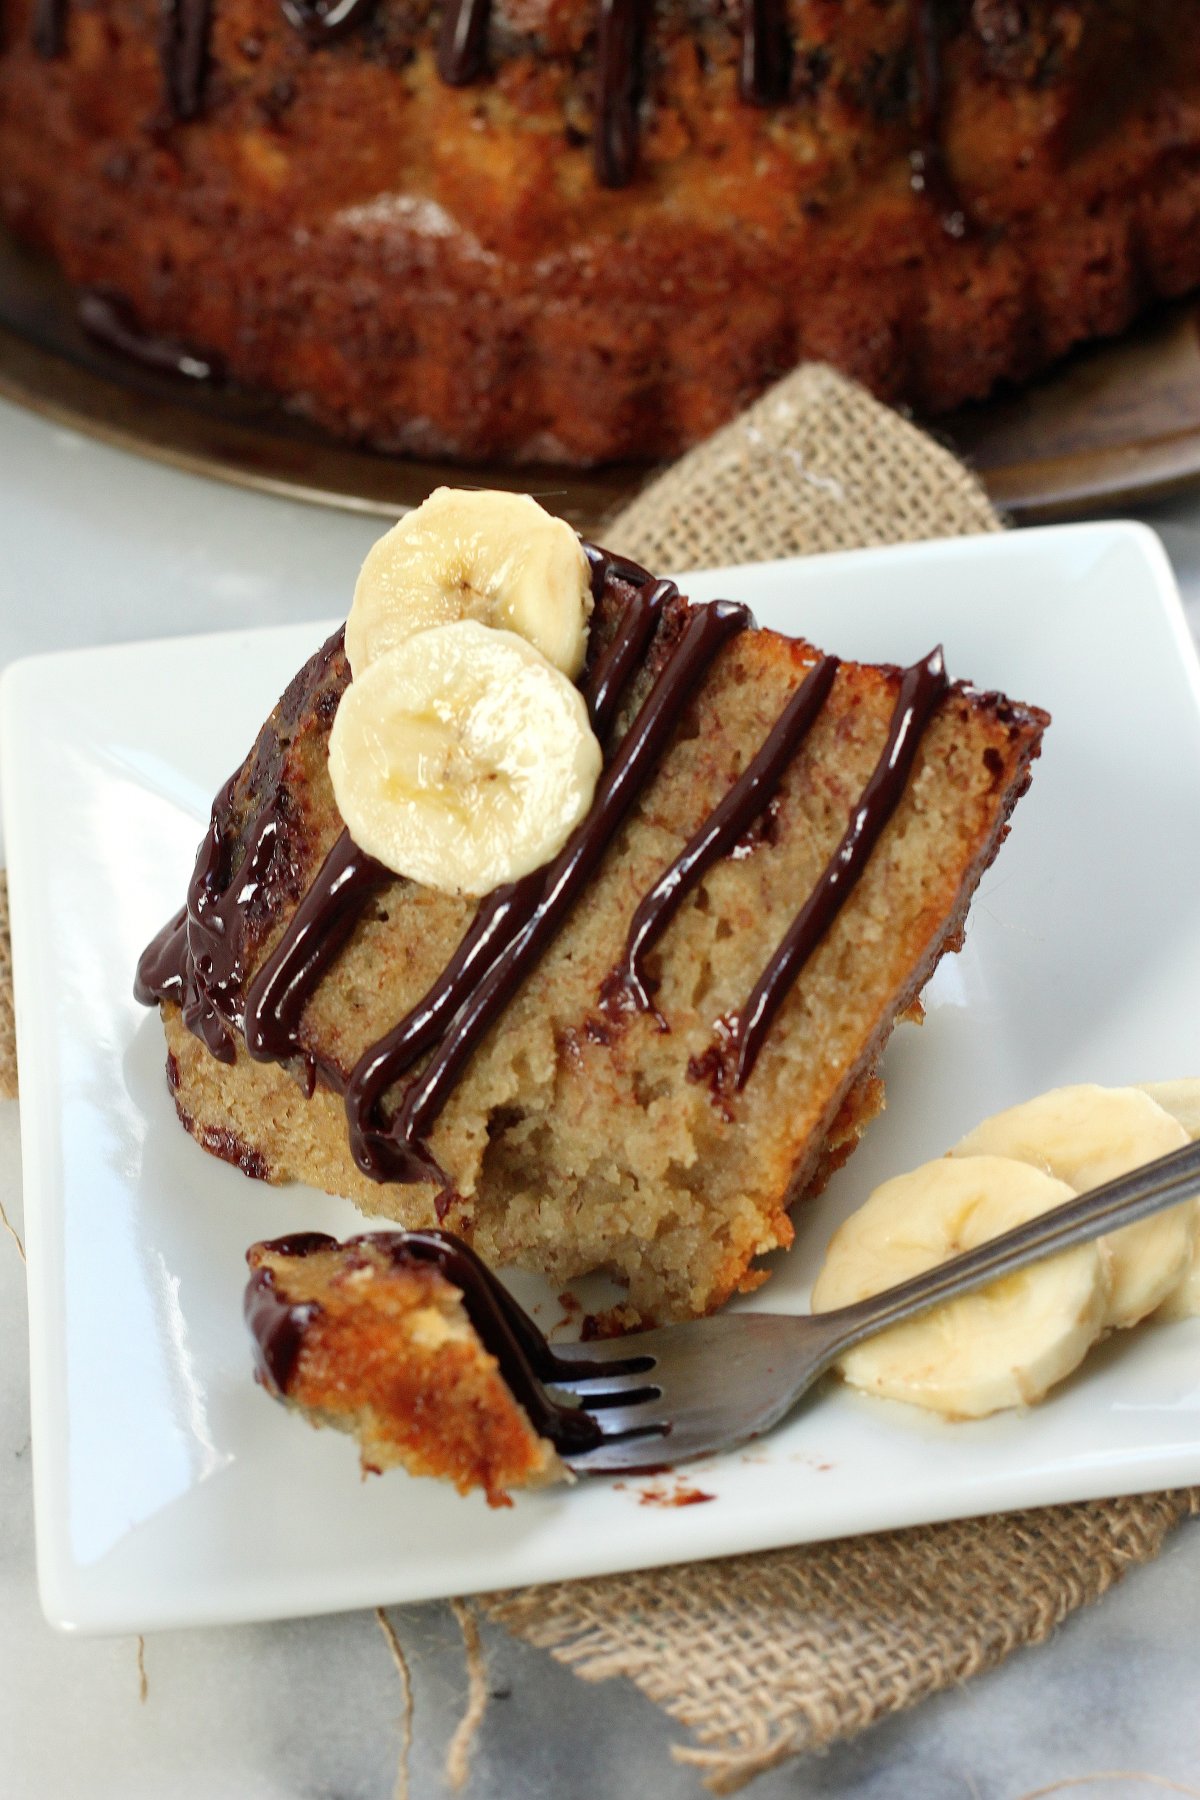 Banana Upside Down Cake in a Frying Pan - My Gorgeous Recipes